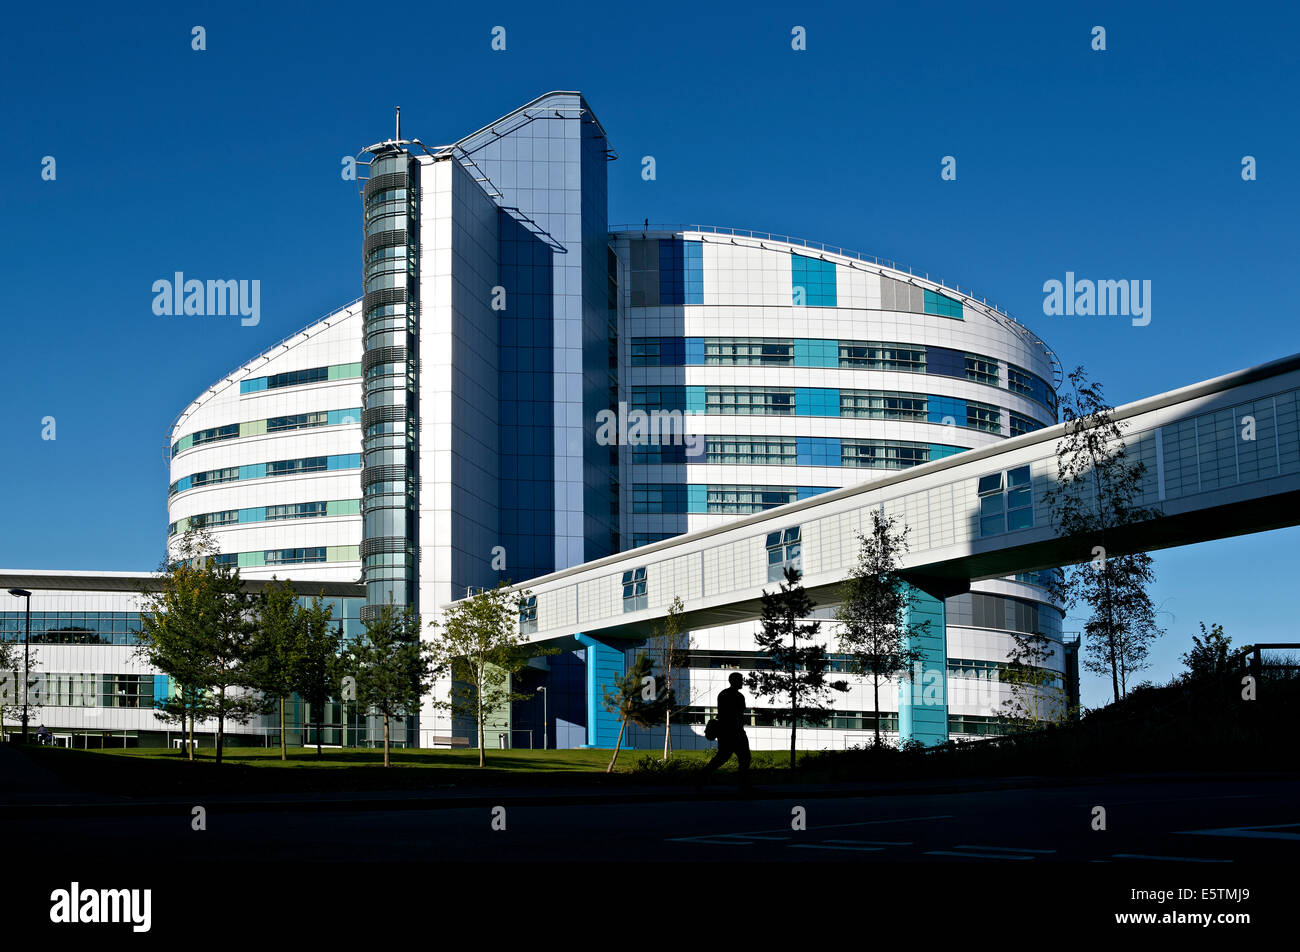 Exterior of the NHS Queen Elizabeth Hospital in Birmingham, also known as the QE Hospital Birmingham or UHB. Stock Photo